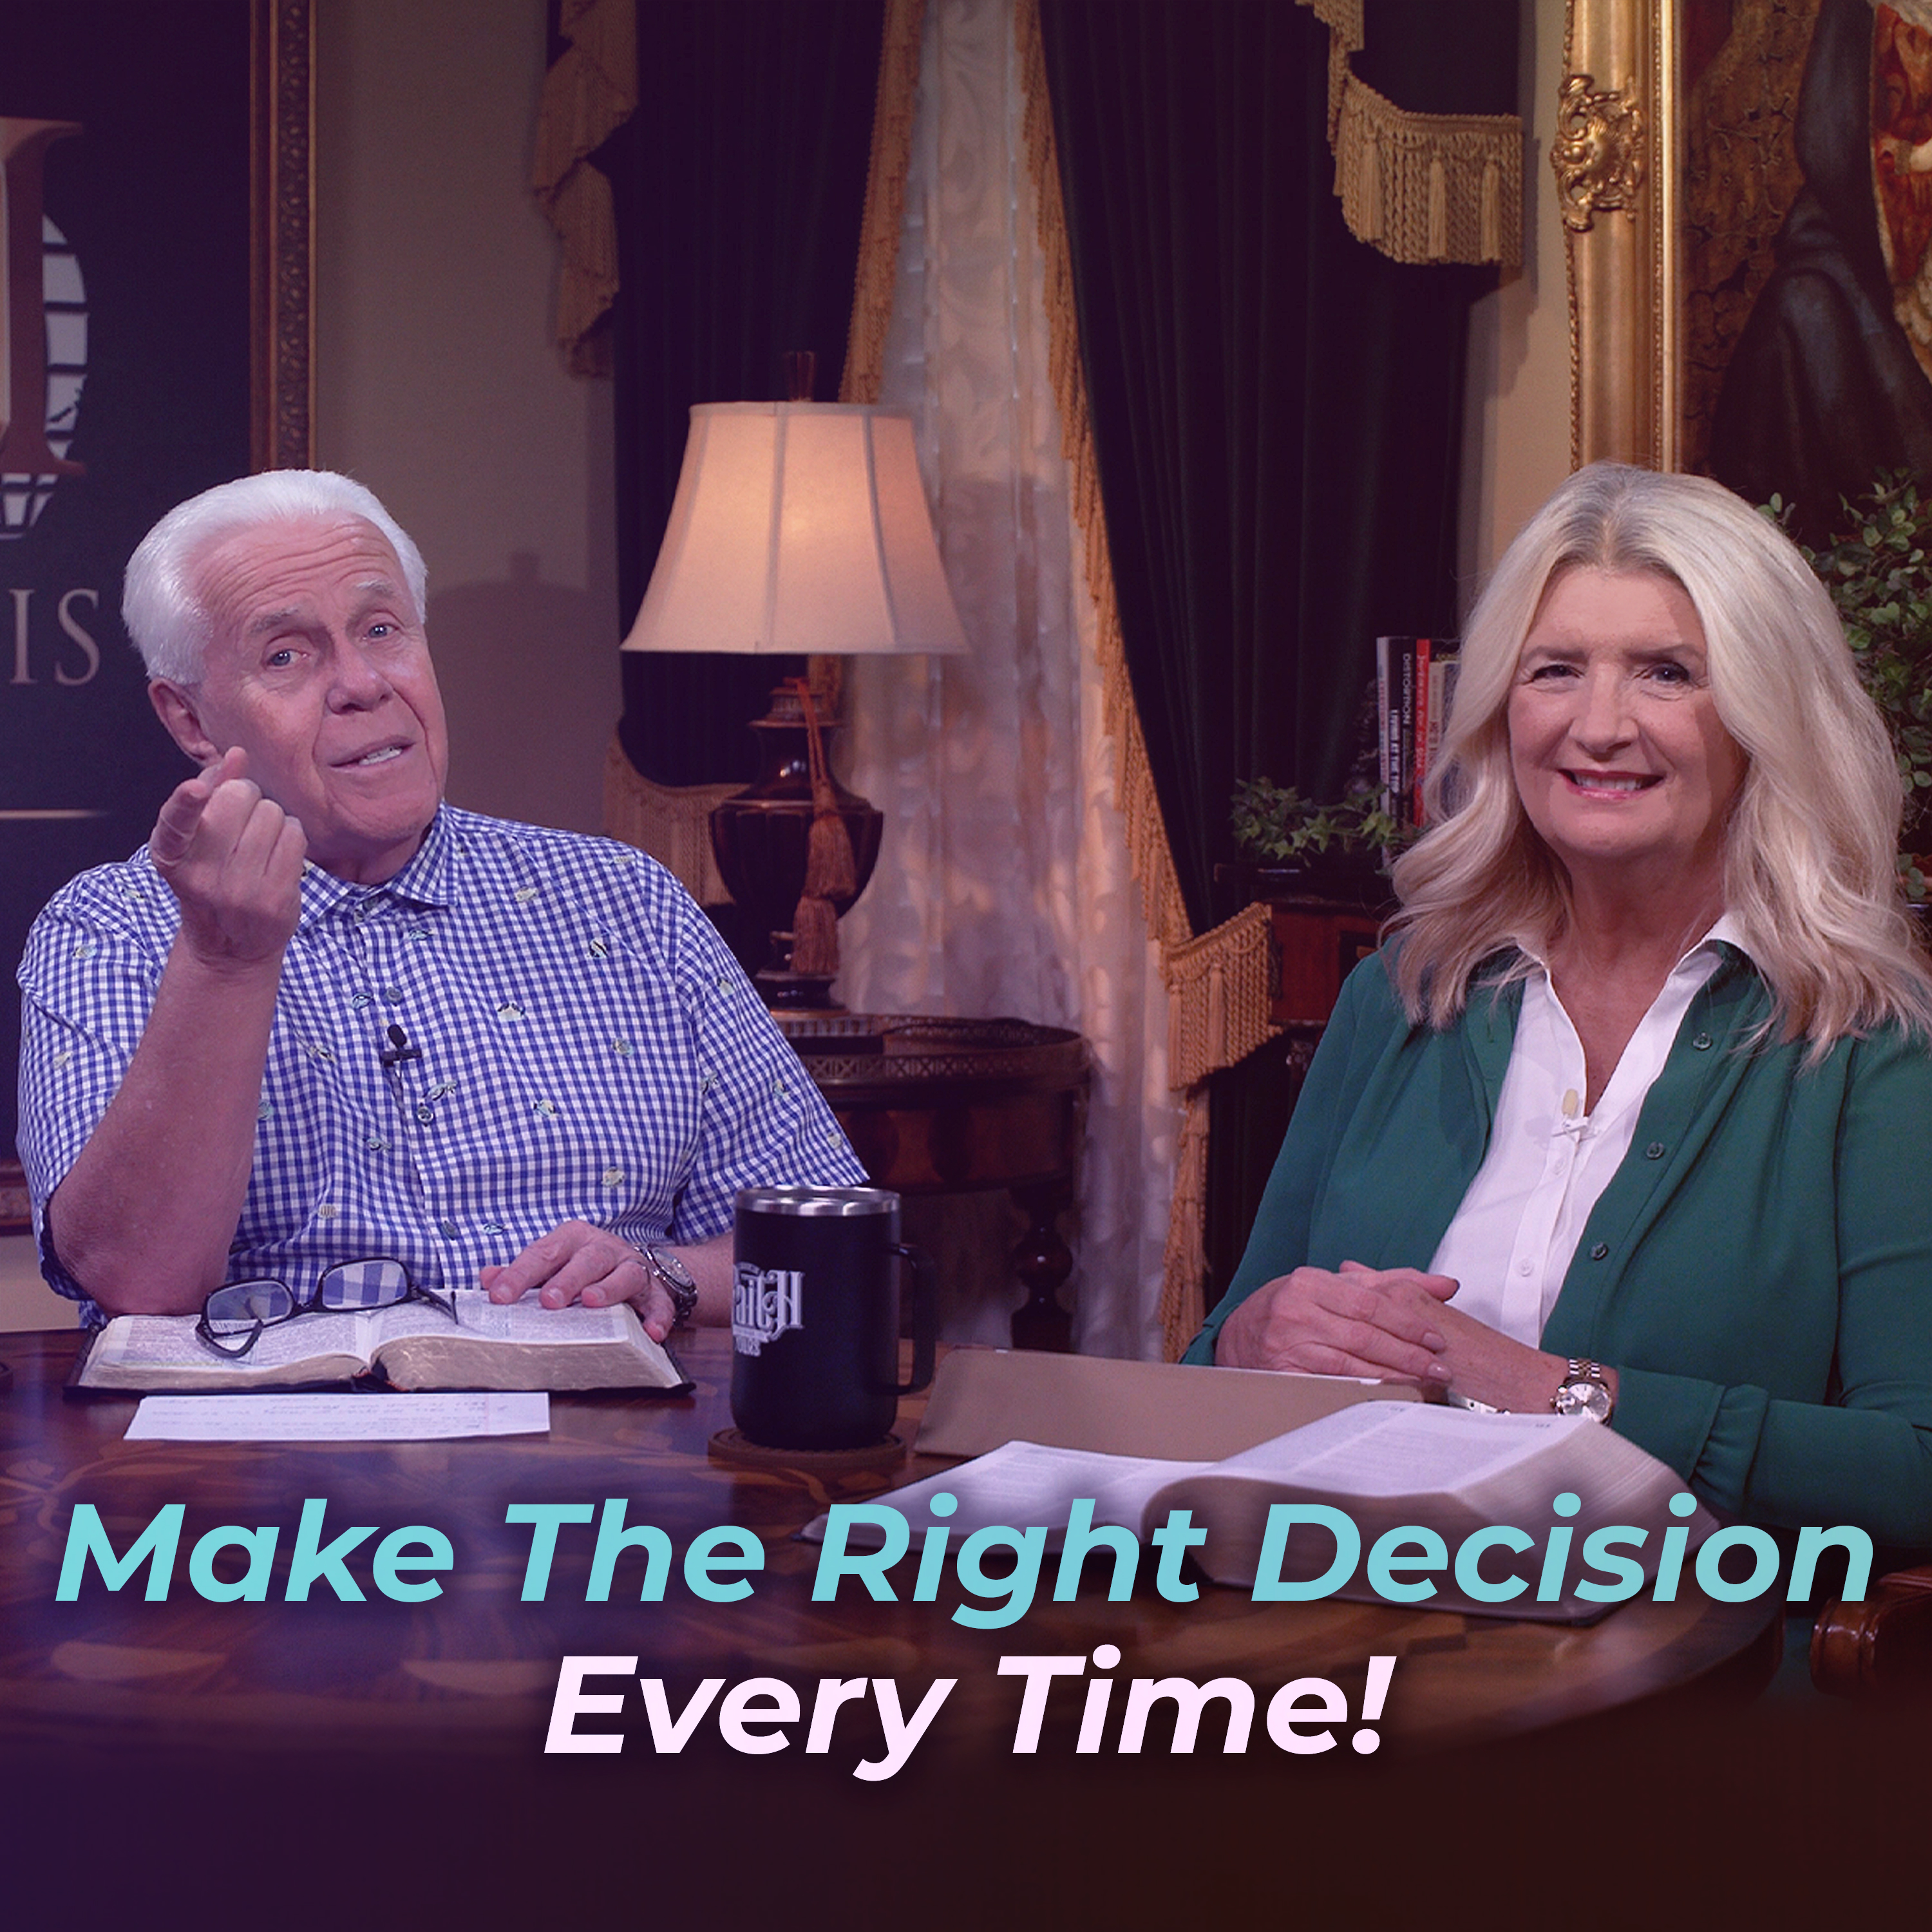 Make The Right Decision Every Time!